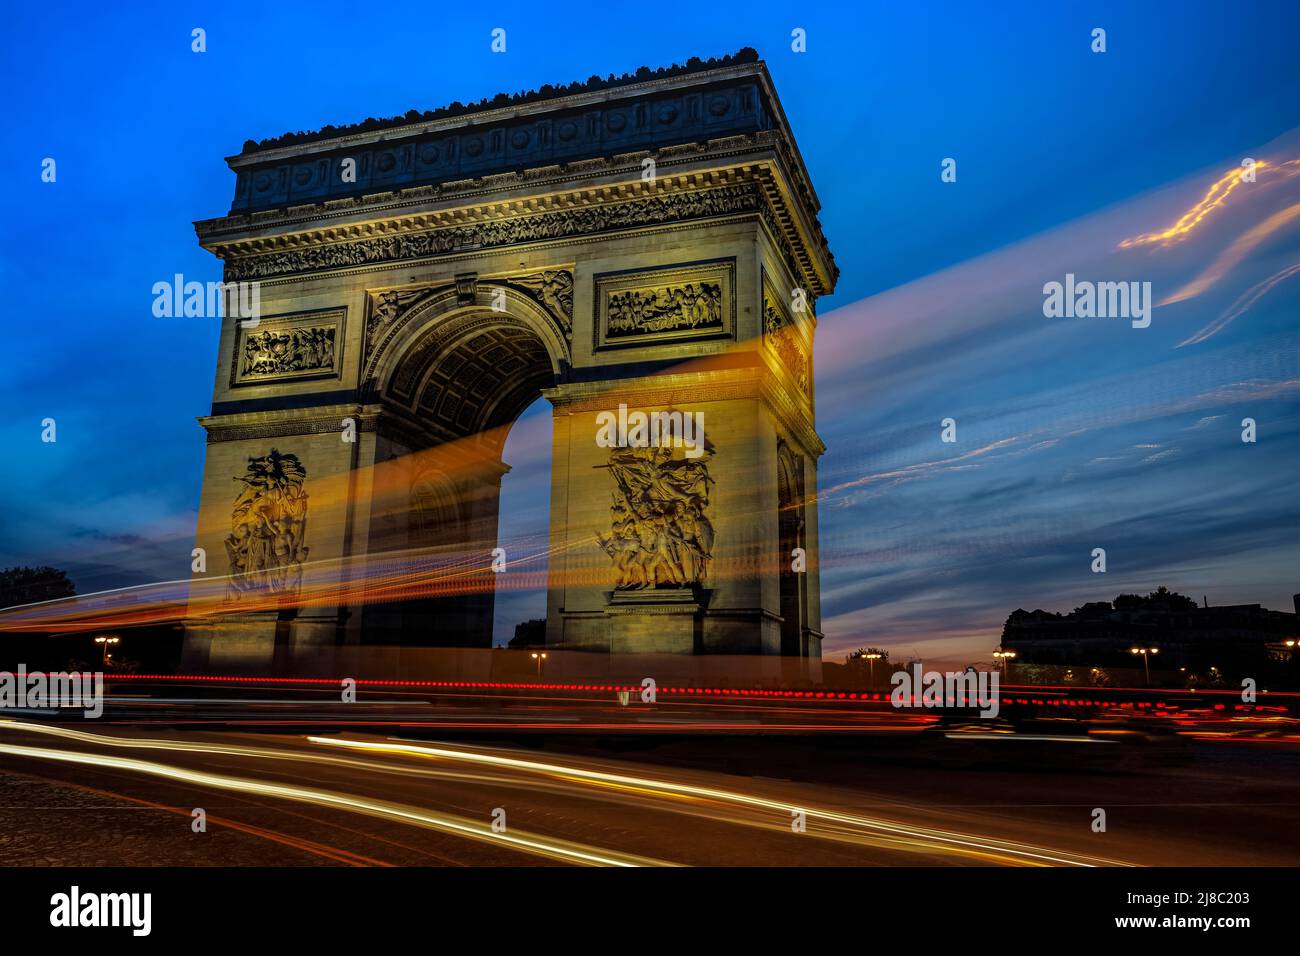 The Arch of Triumph with traffic traces of light during a dramatic sunset. Photo taken on 22nd of April 2022 in Paris, France. Stock Photo